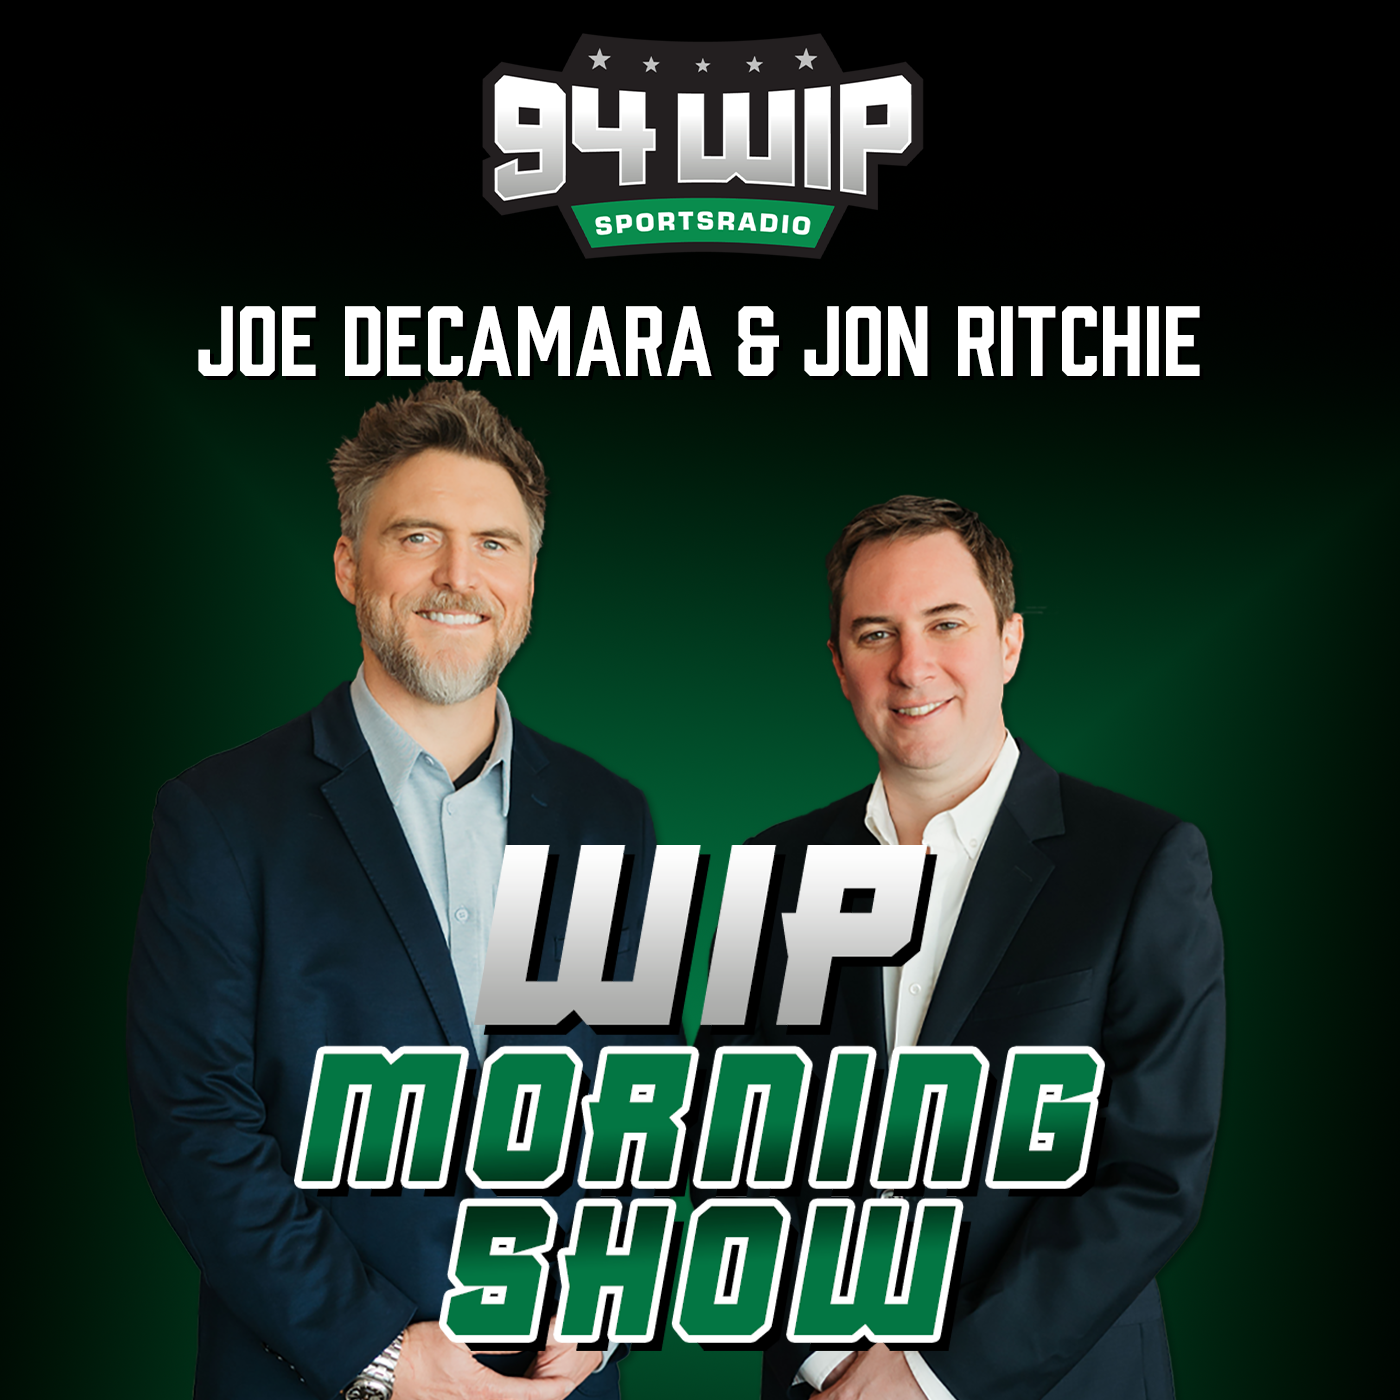 Ron Jaworski Previews the Super Bowl - 94WIP Morning Show with Joe DeCamara  and Jon Ritchie 